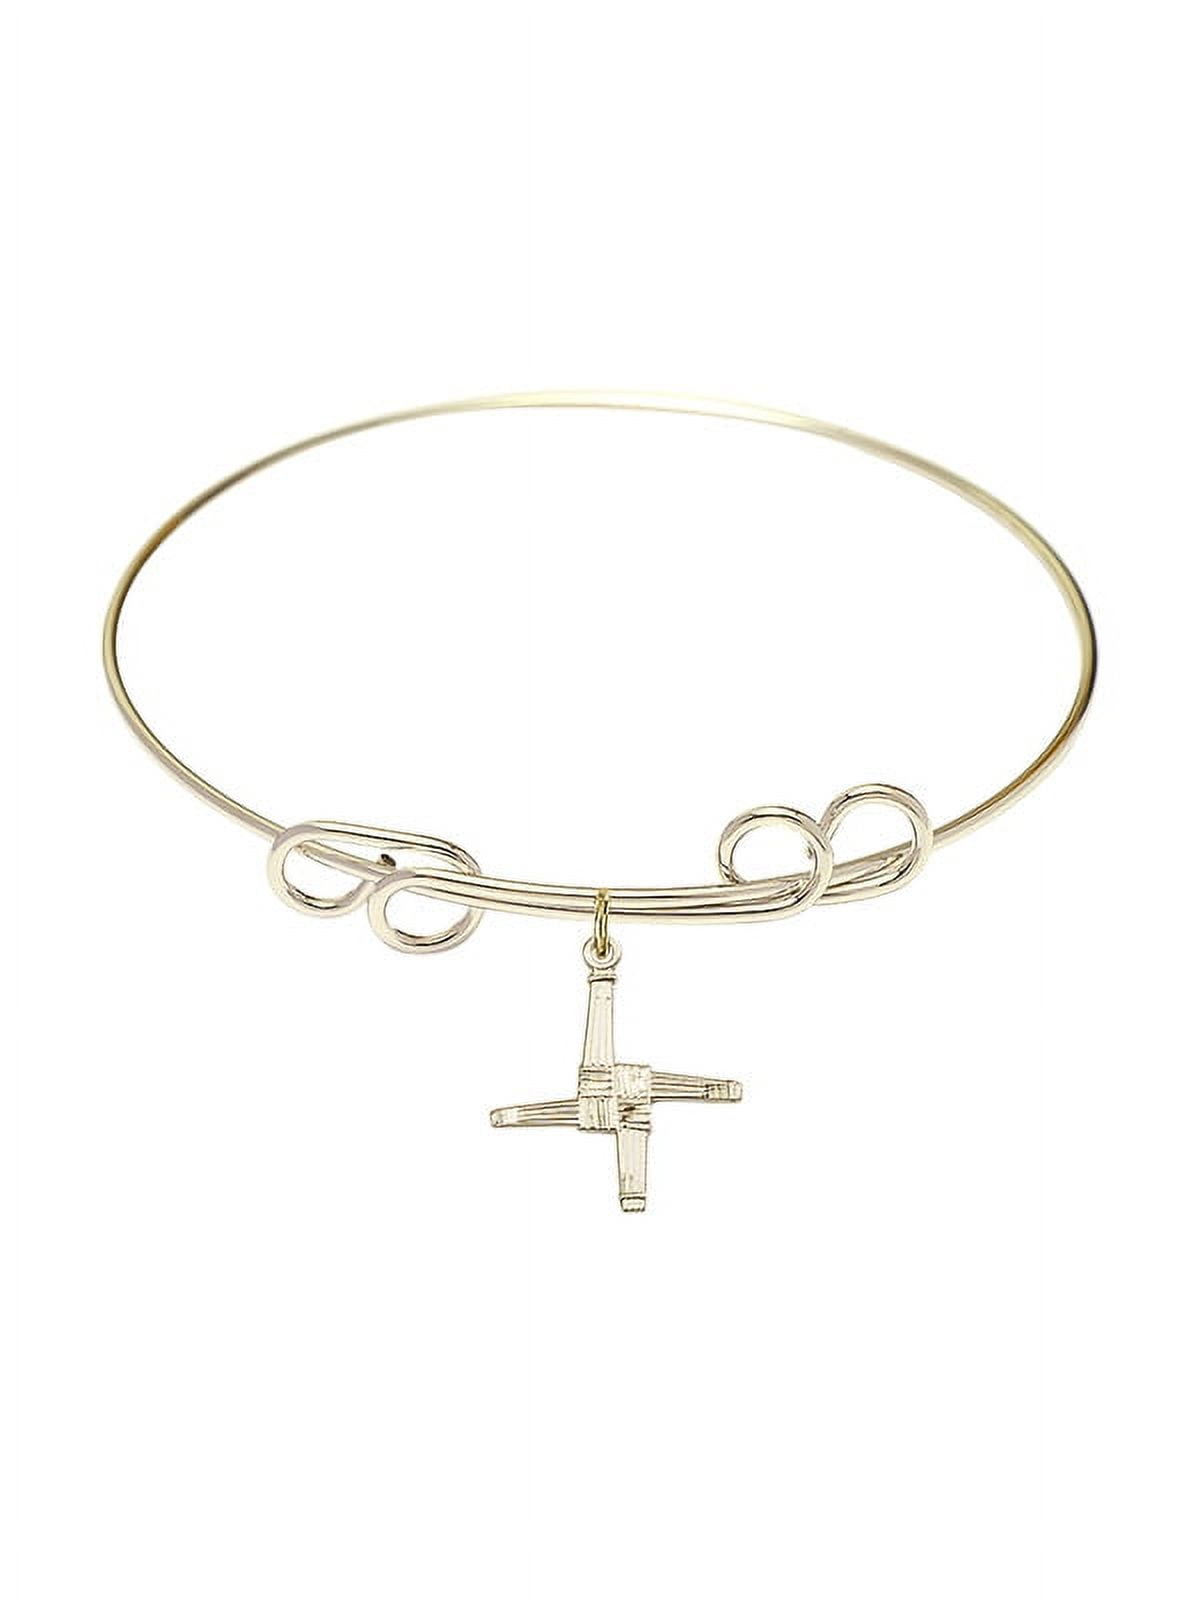 Rhona Sutton Children's Diamond Accent Cross Open Bangle Bracelet in  Sterling Silver and 14K Gold over Sterling Silver - Macy's